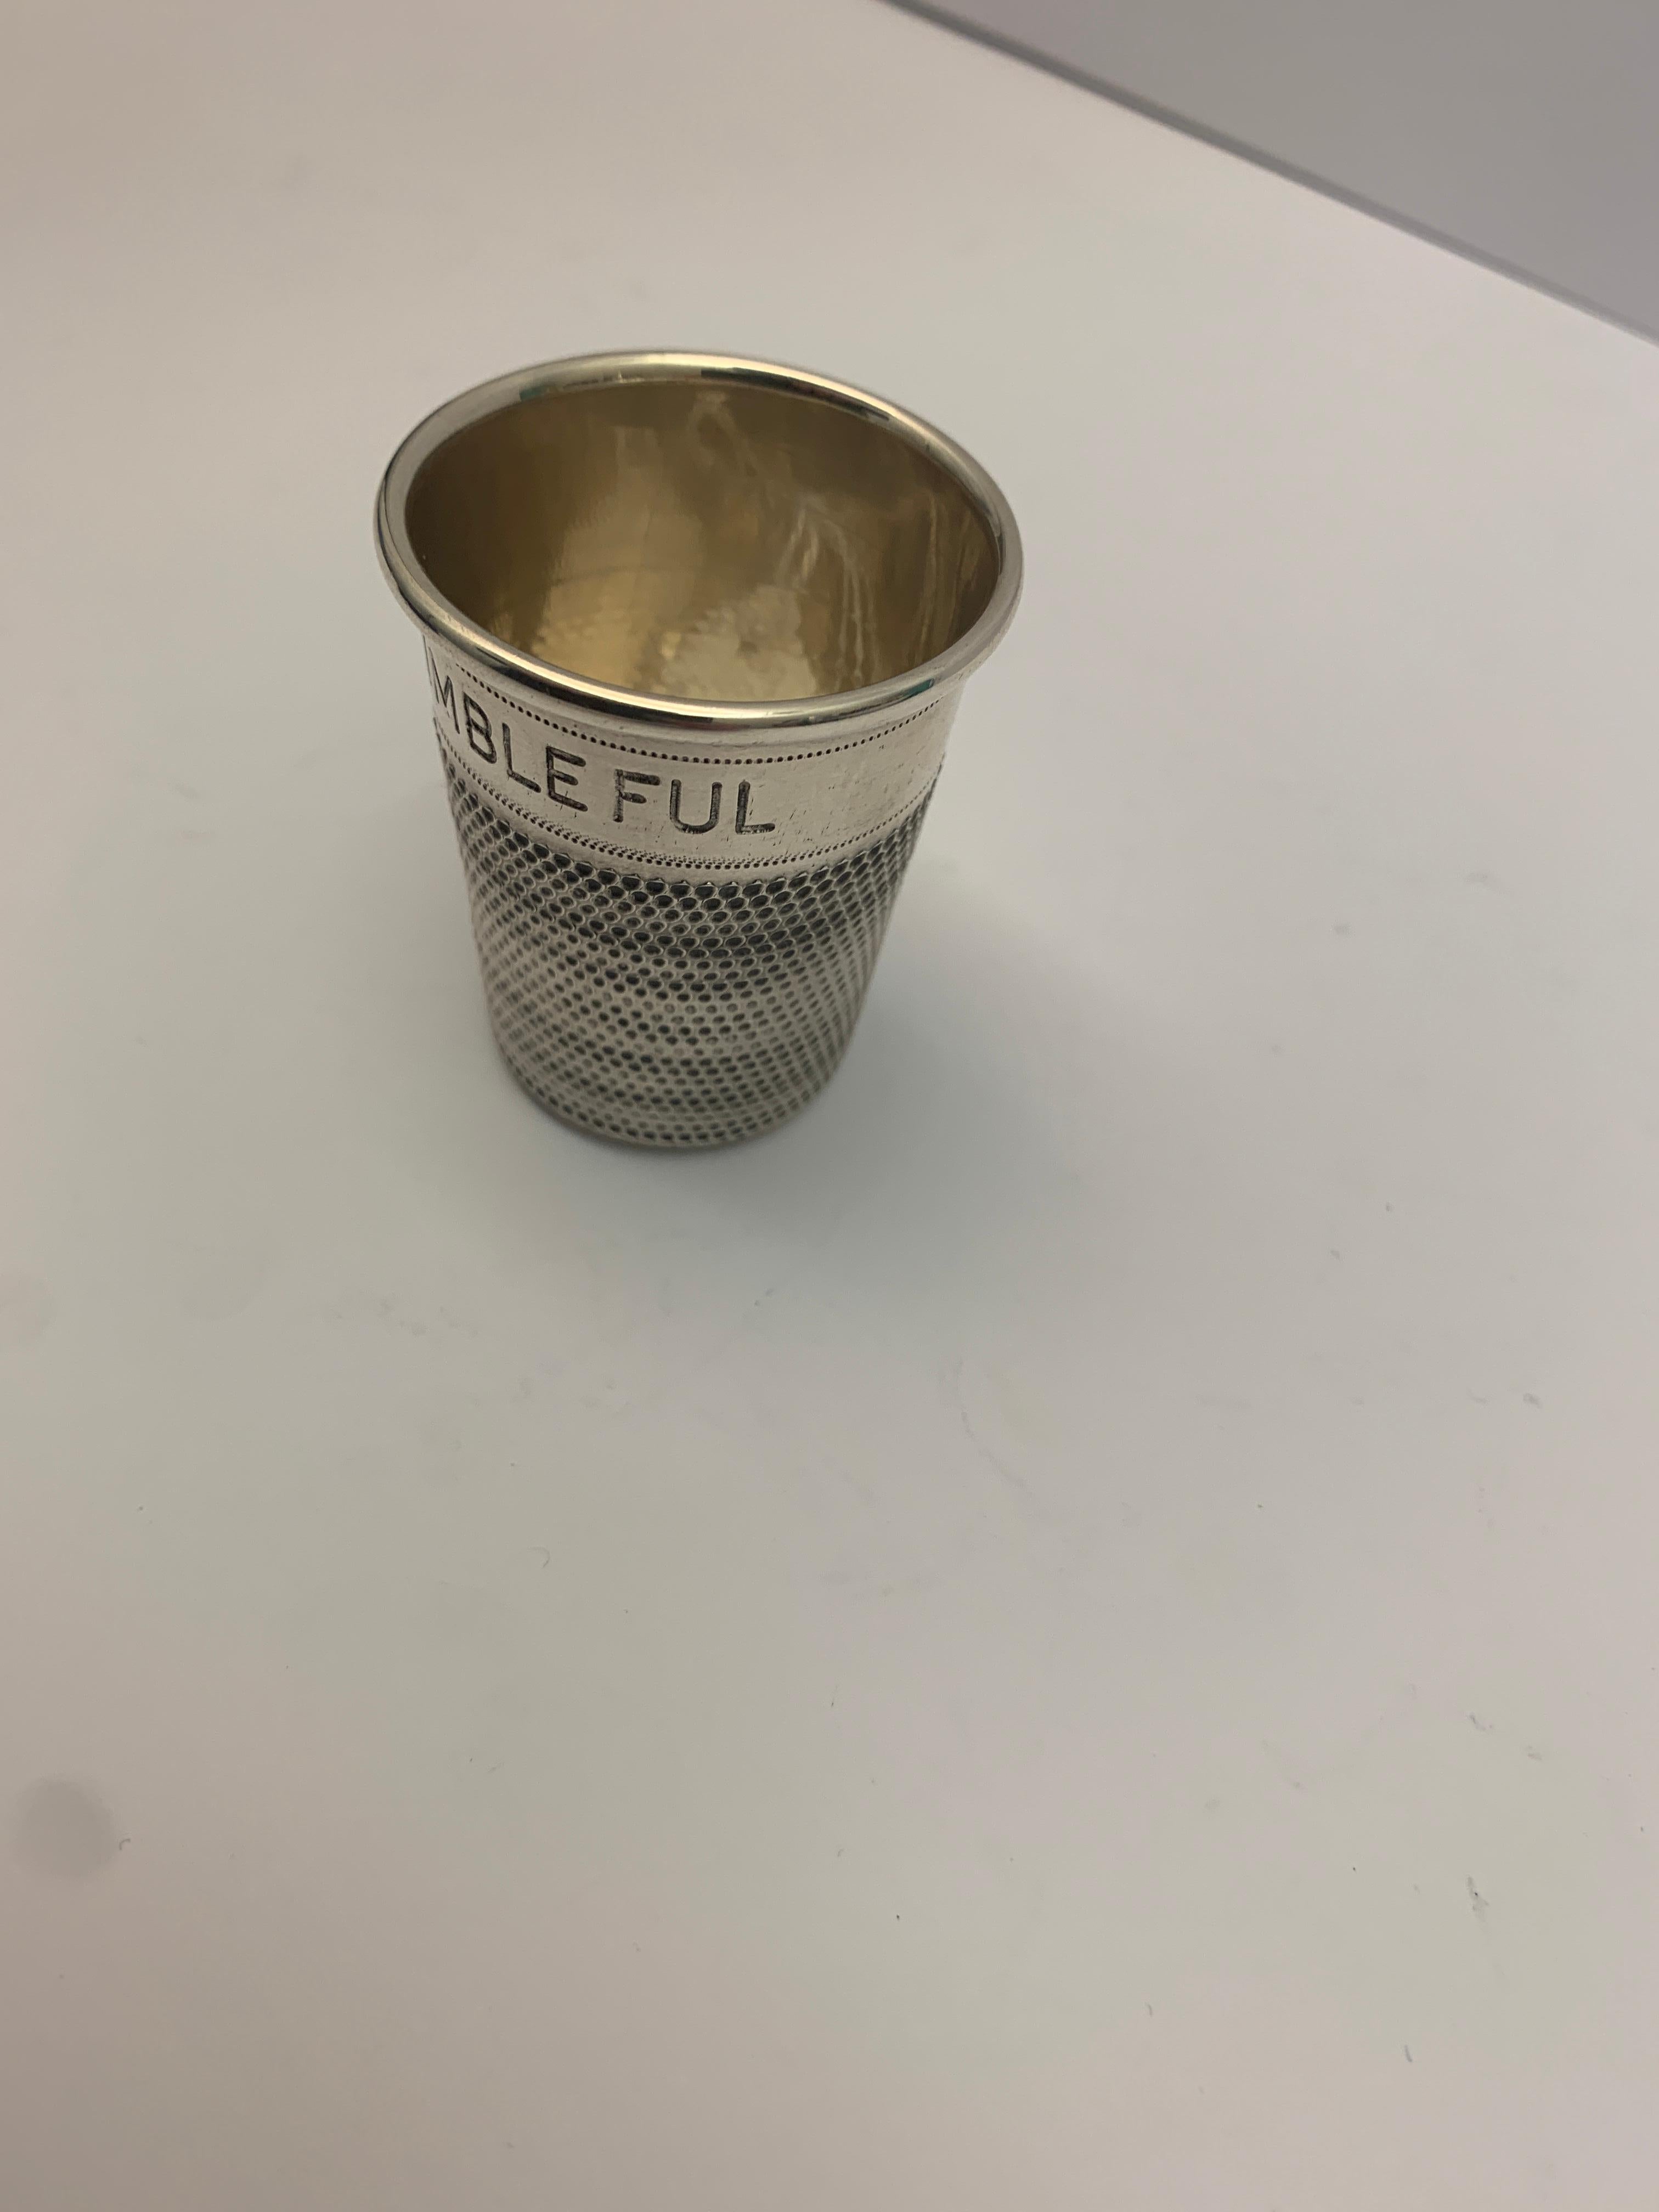 Small Silver Inscribed Thimble Cup In Good Condition For Sale In London, London